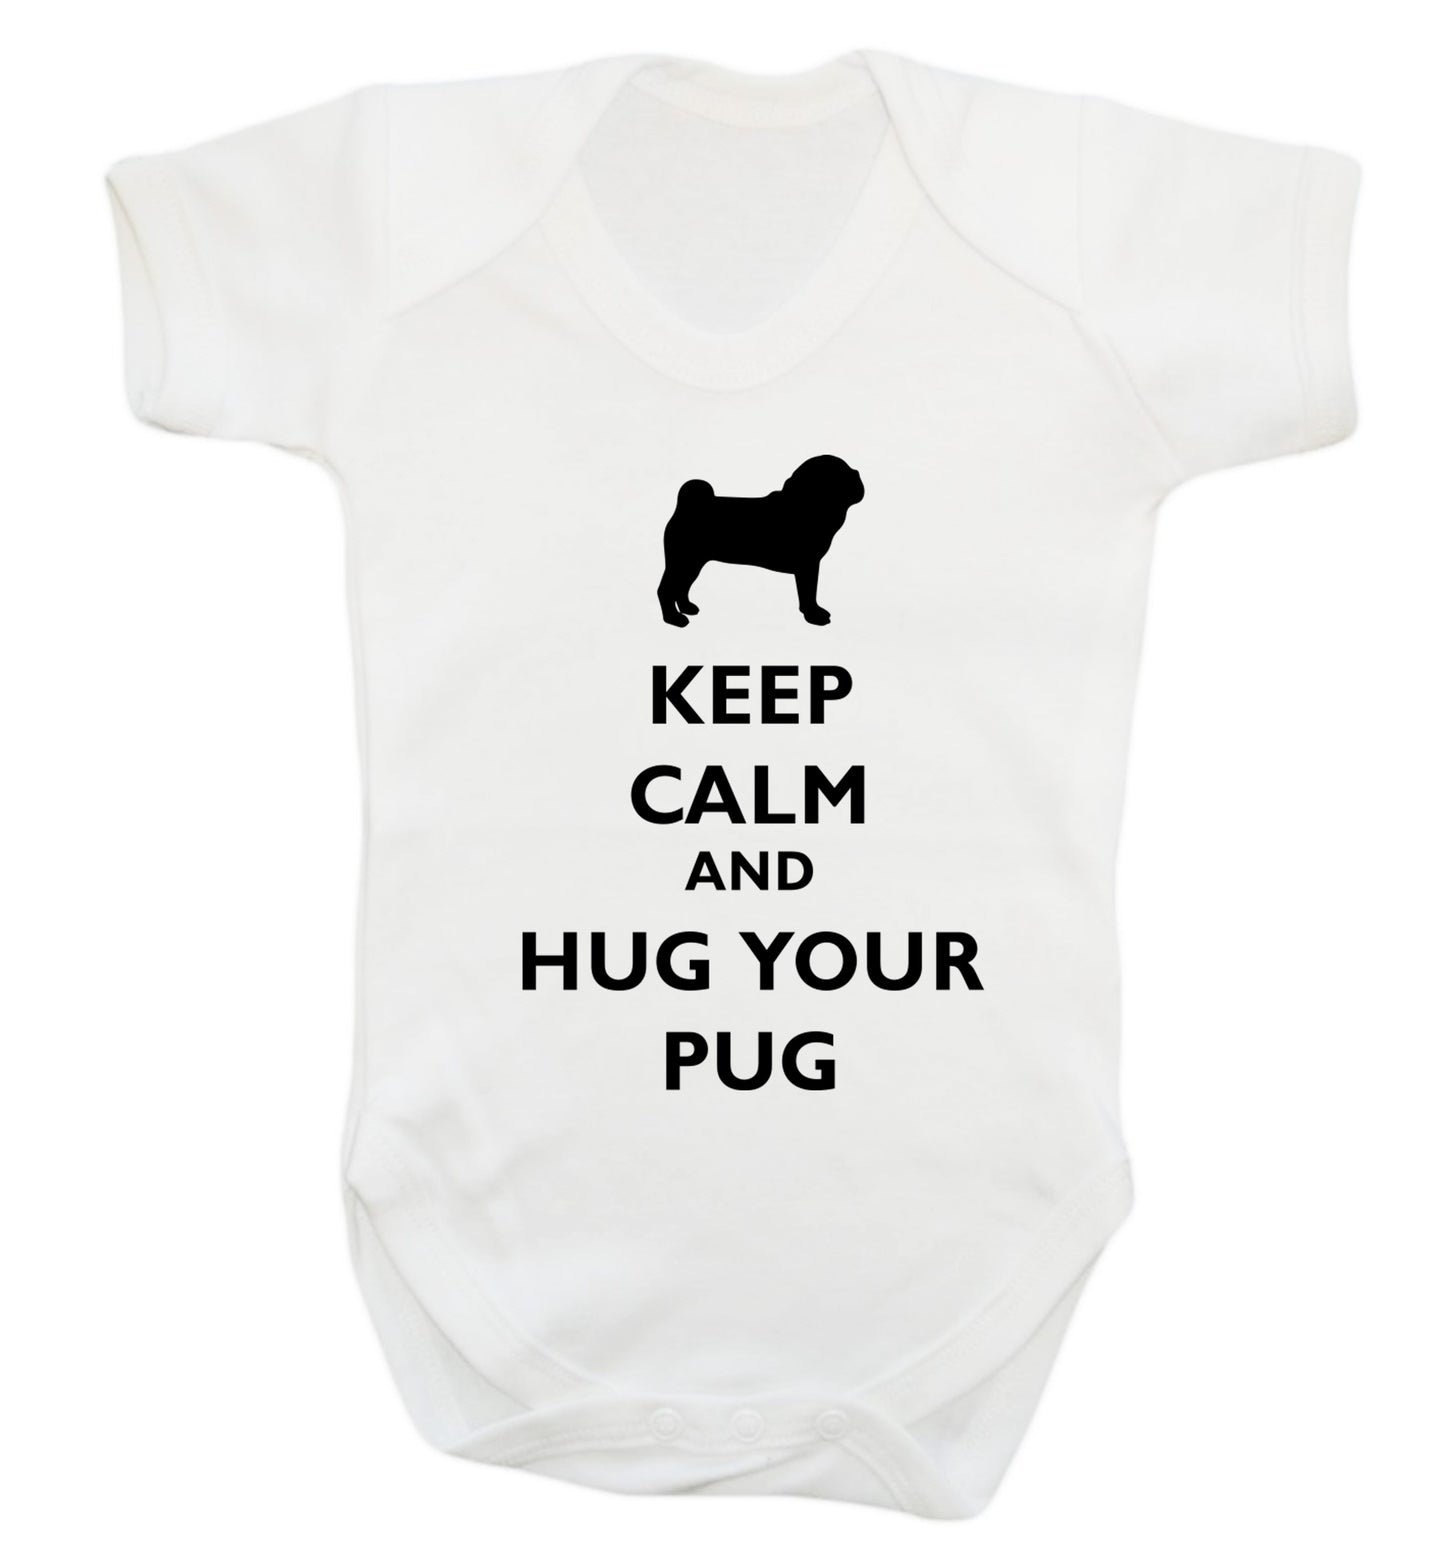 Keep calm and hug your pug Baby Vest white 18-24 months